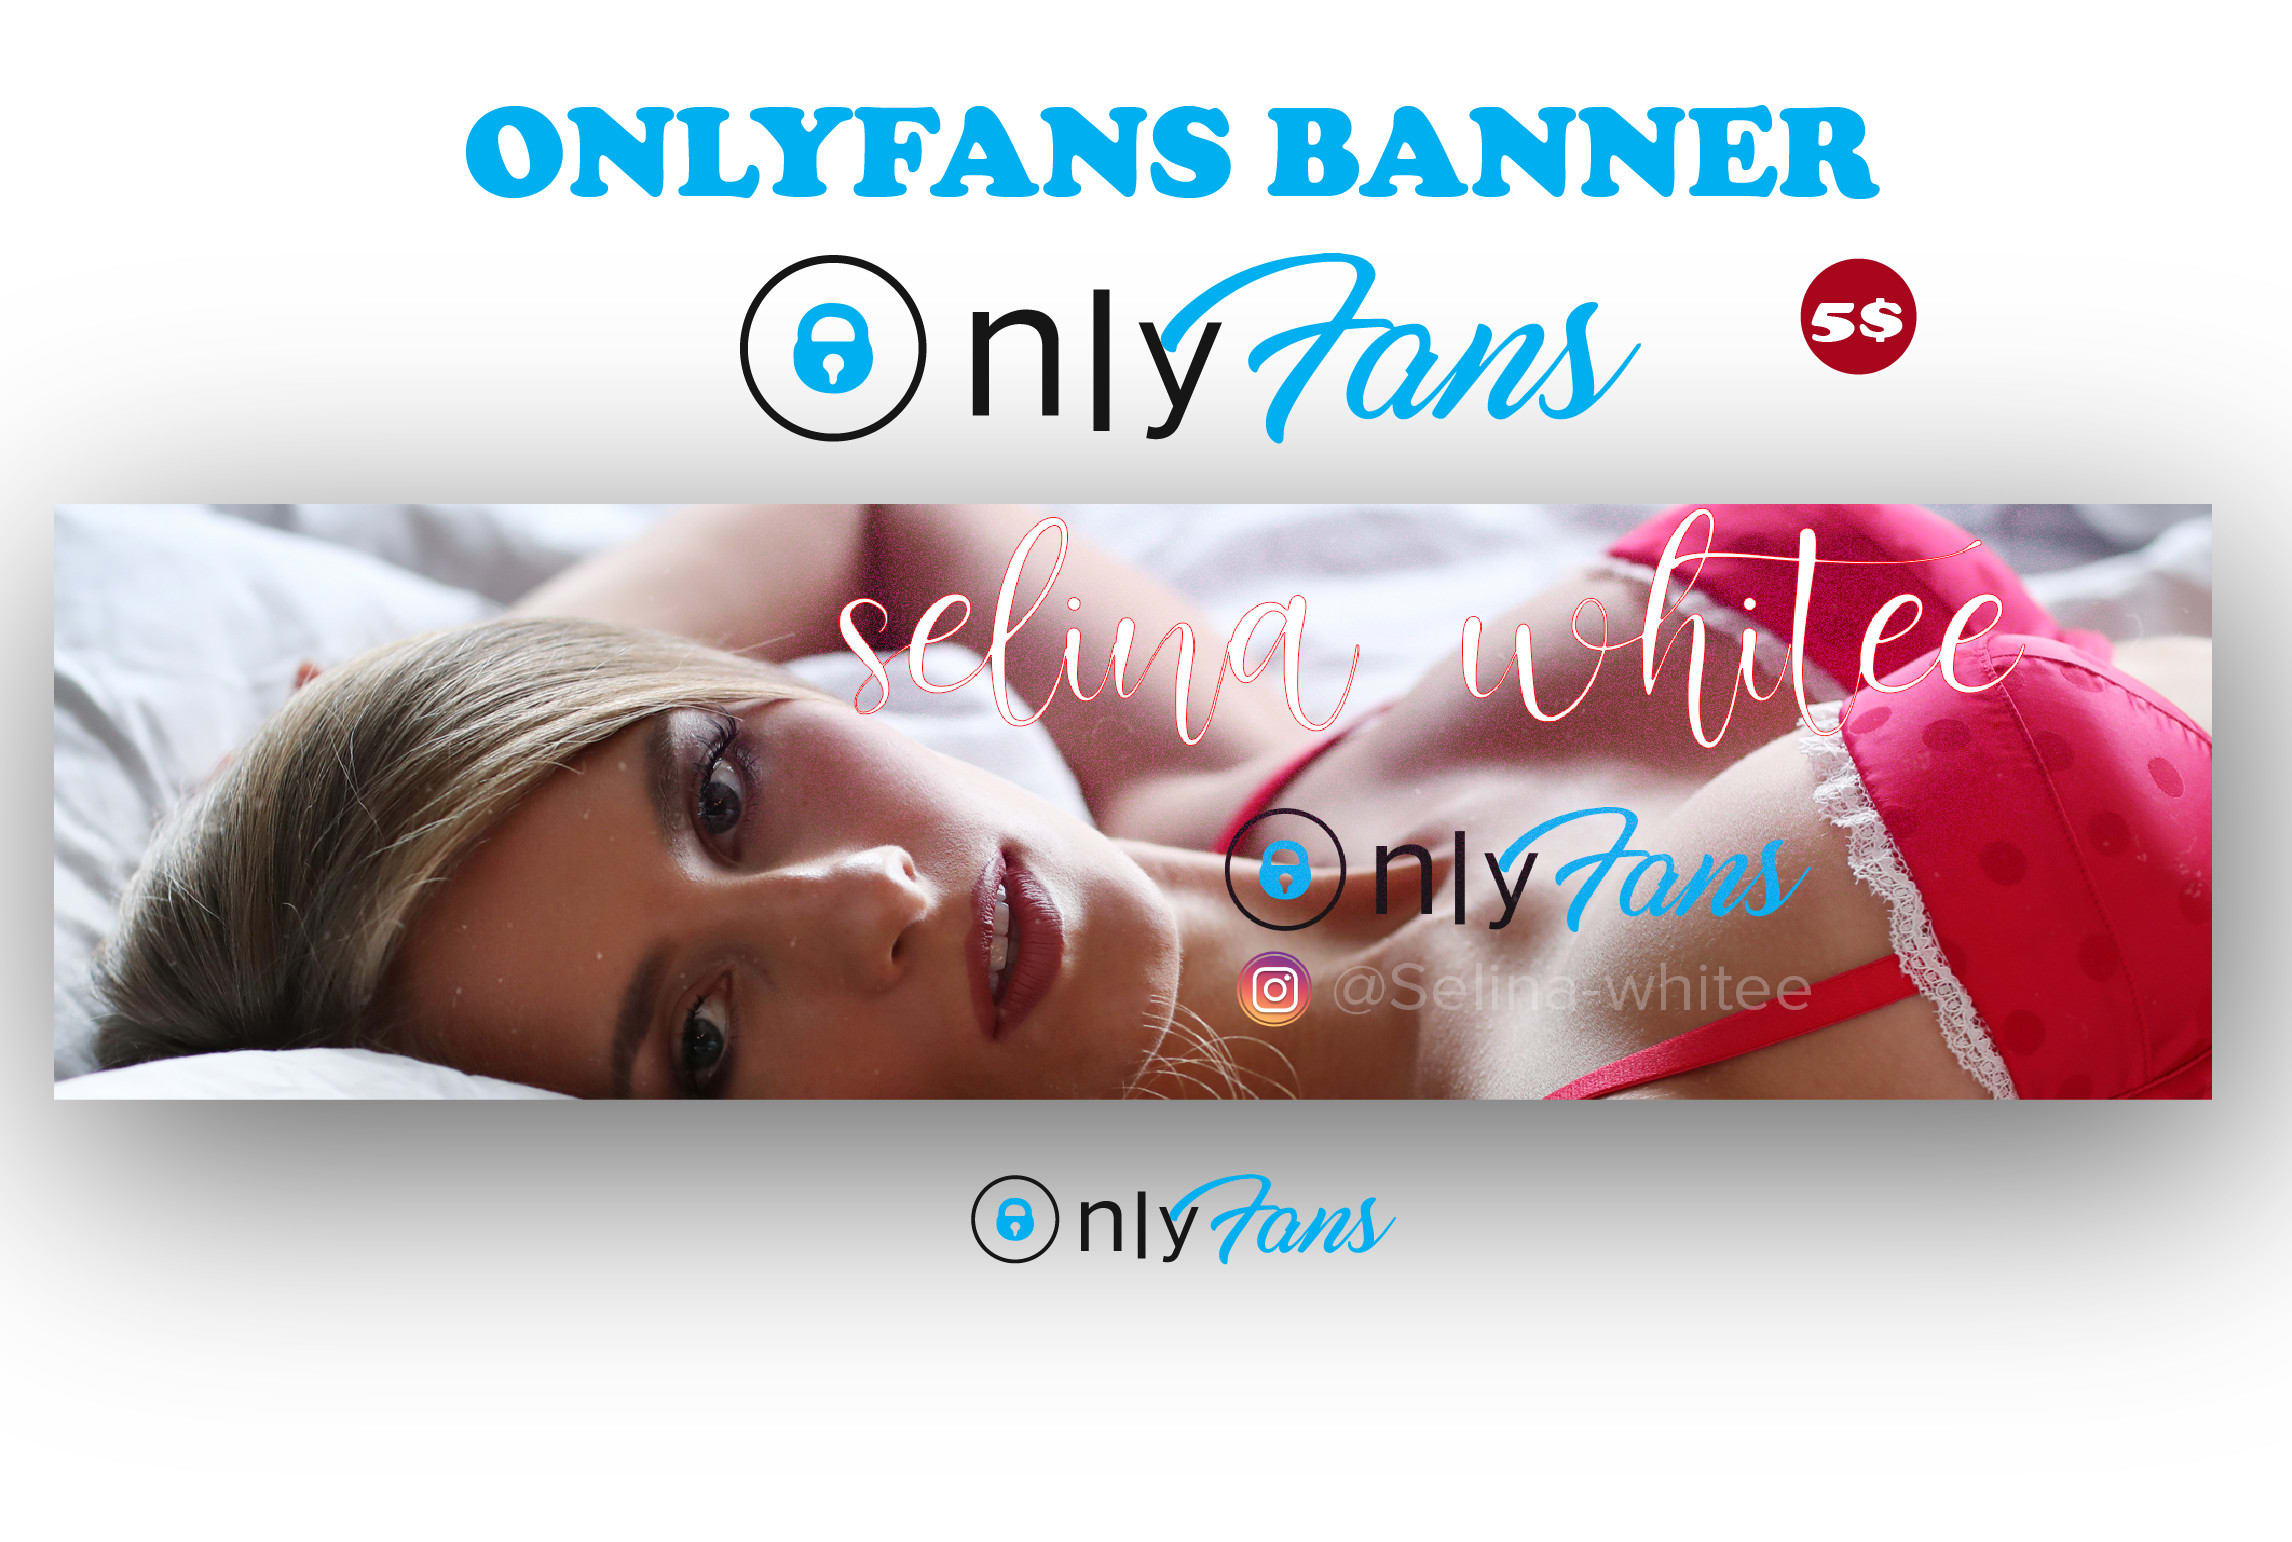 Onlyfans cover photo ideas